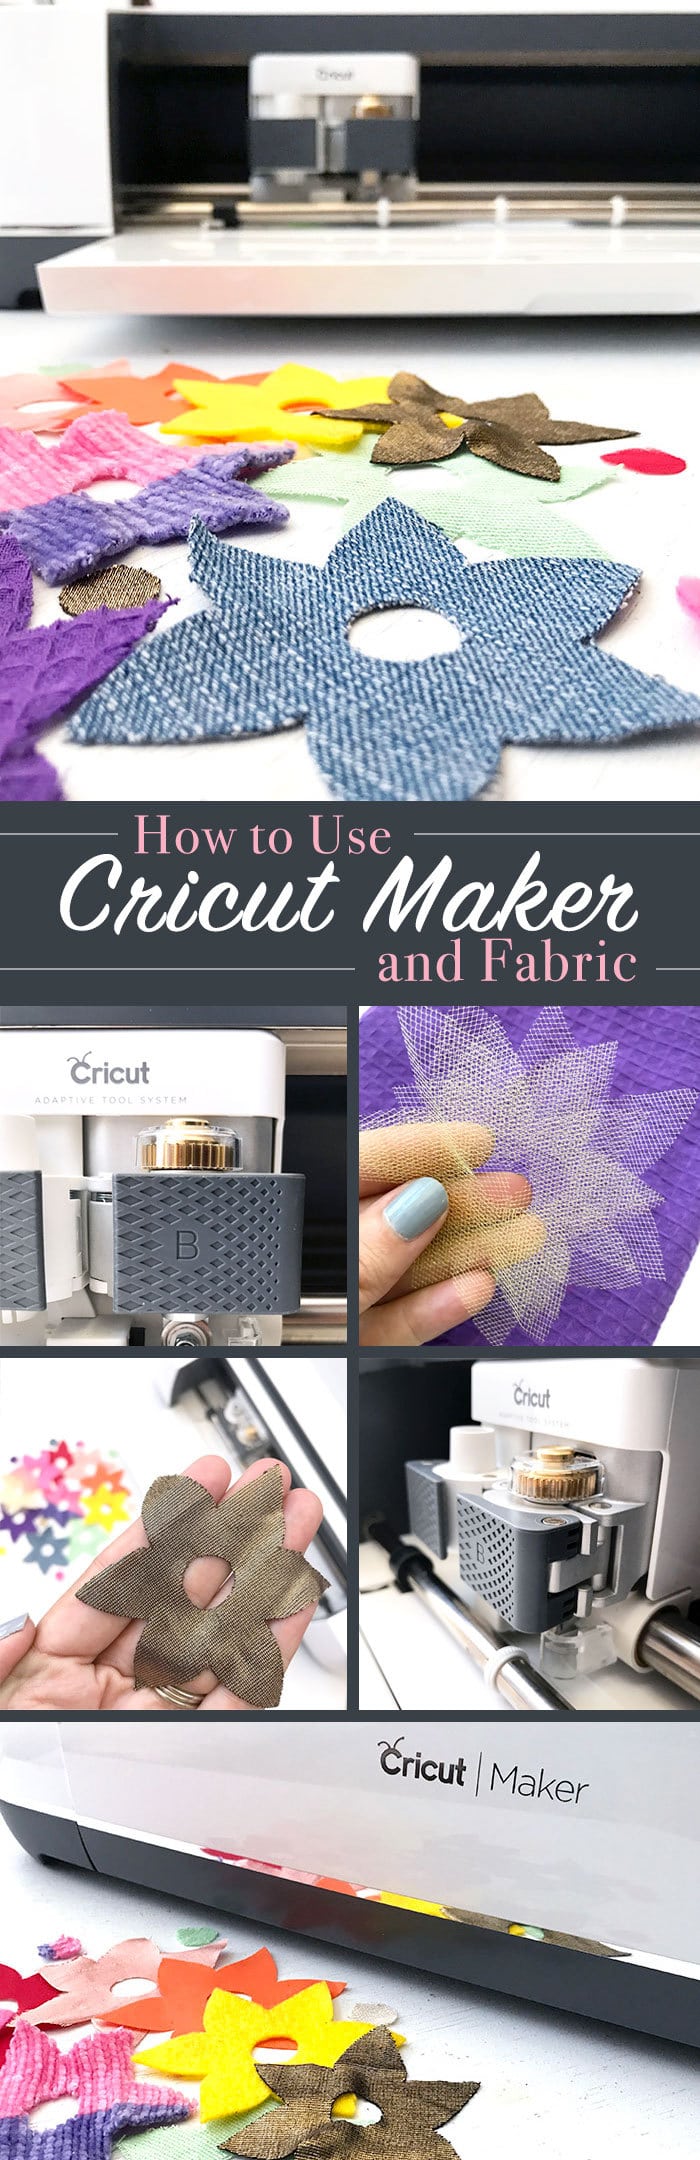 How to use Cricut Maker and Fabric